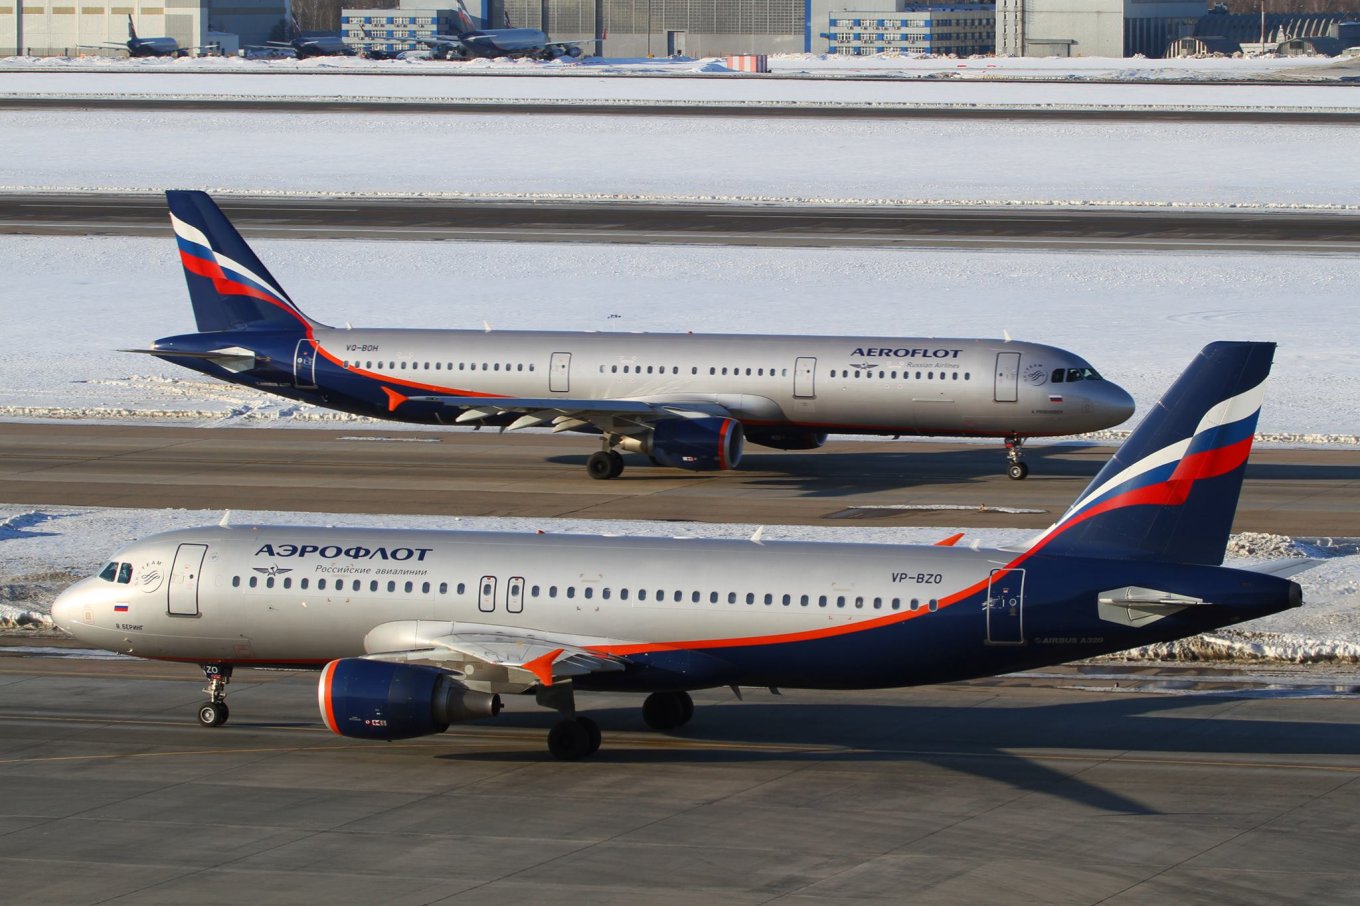 Two Airbus A320 airliners of the russian 